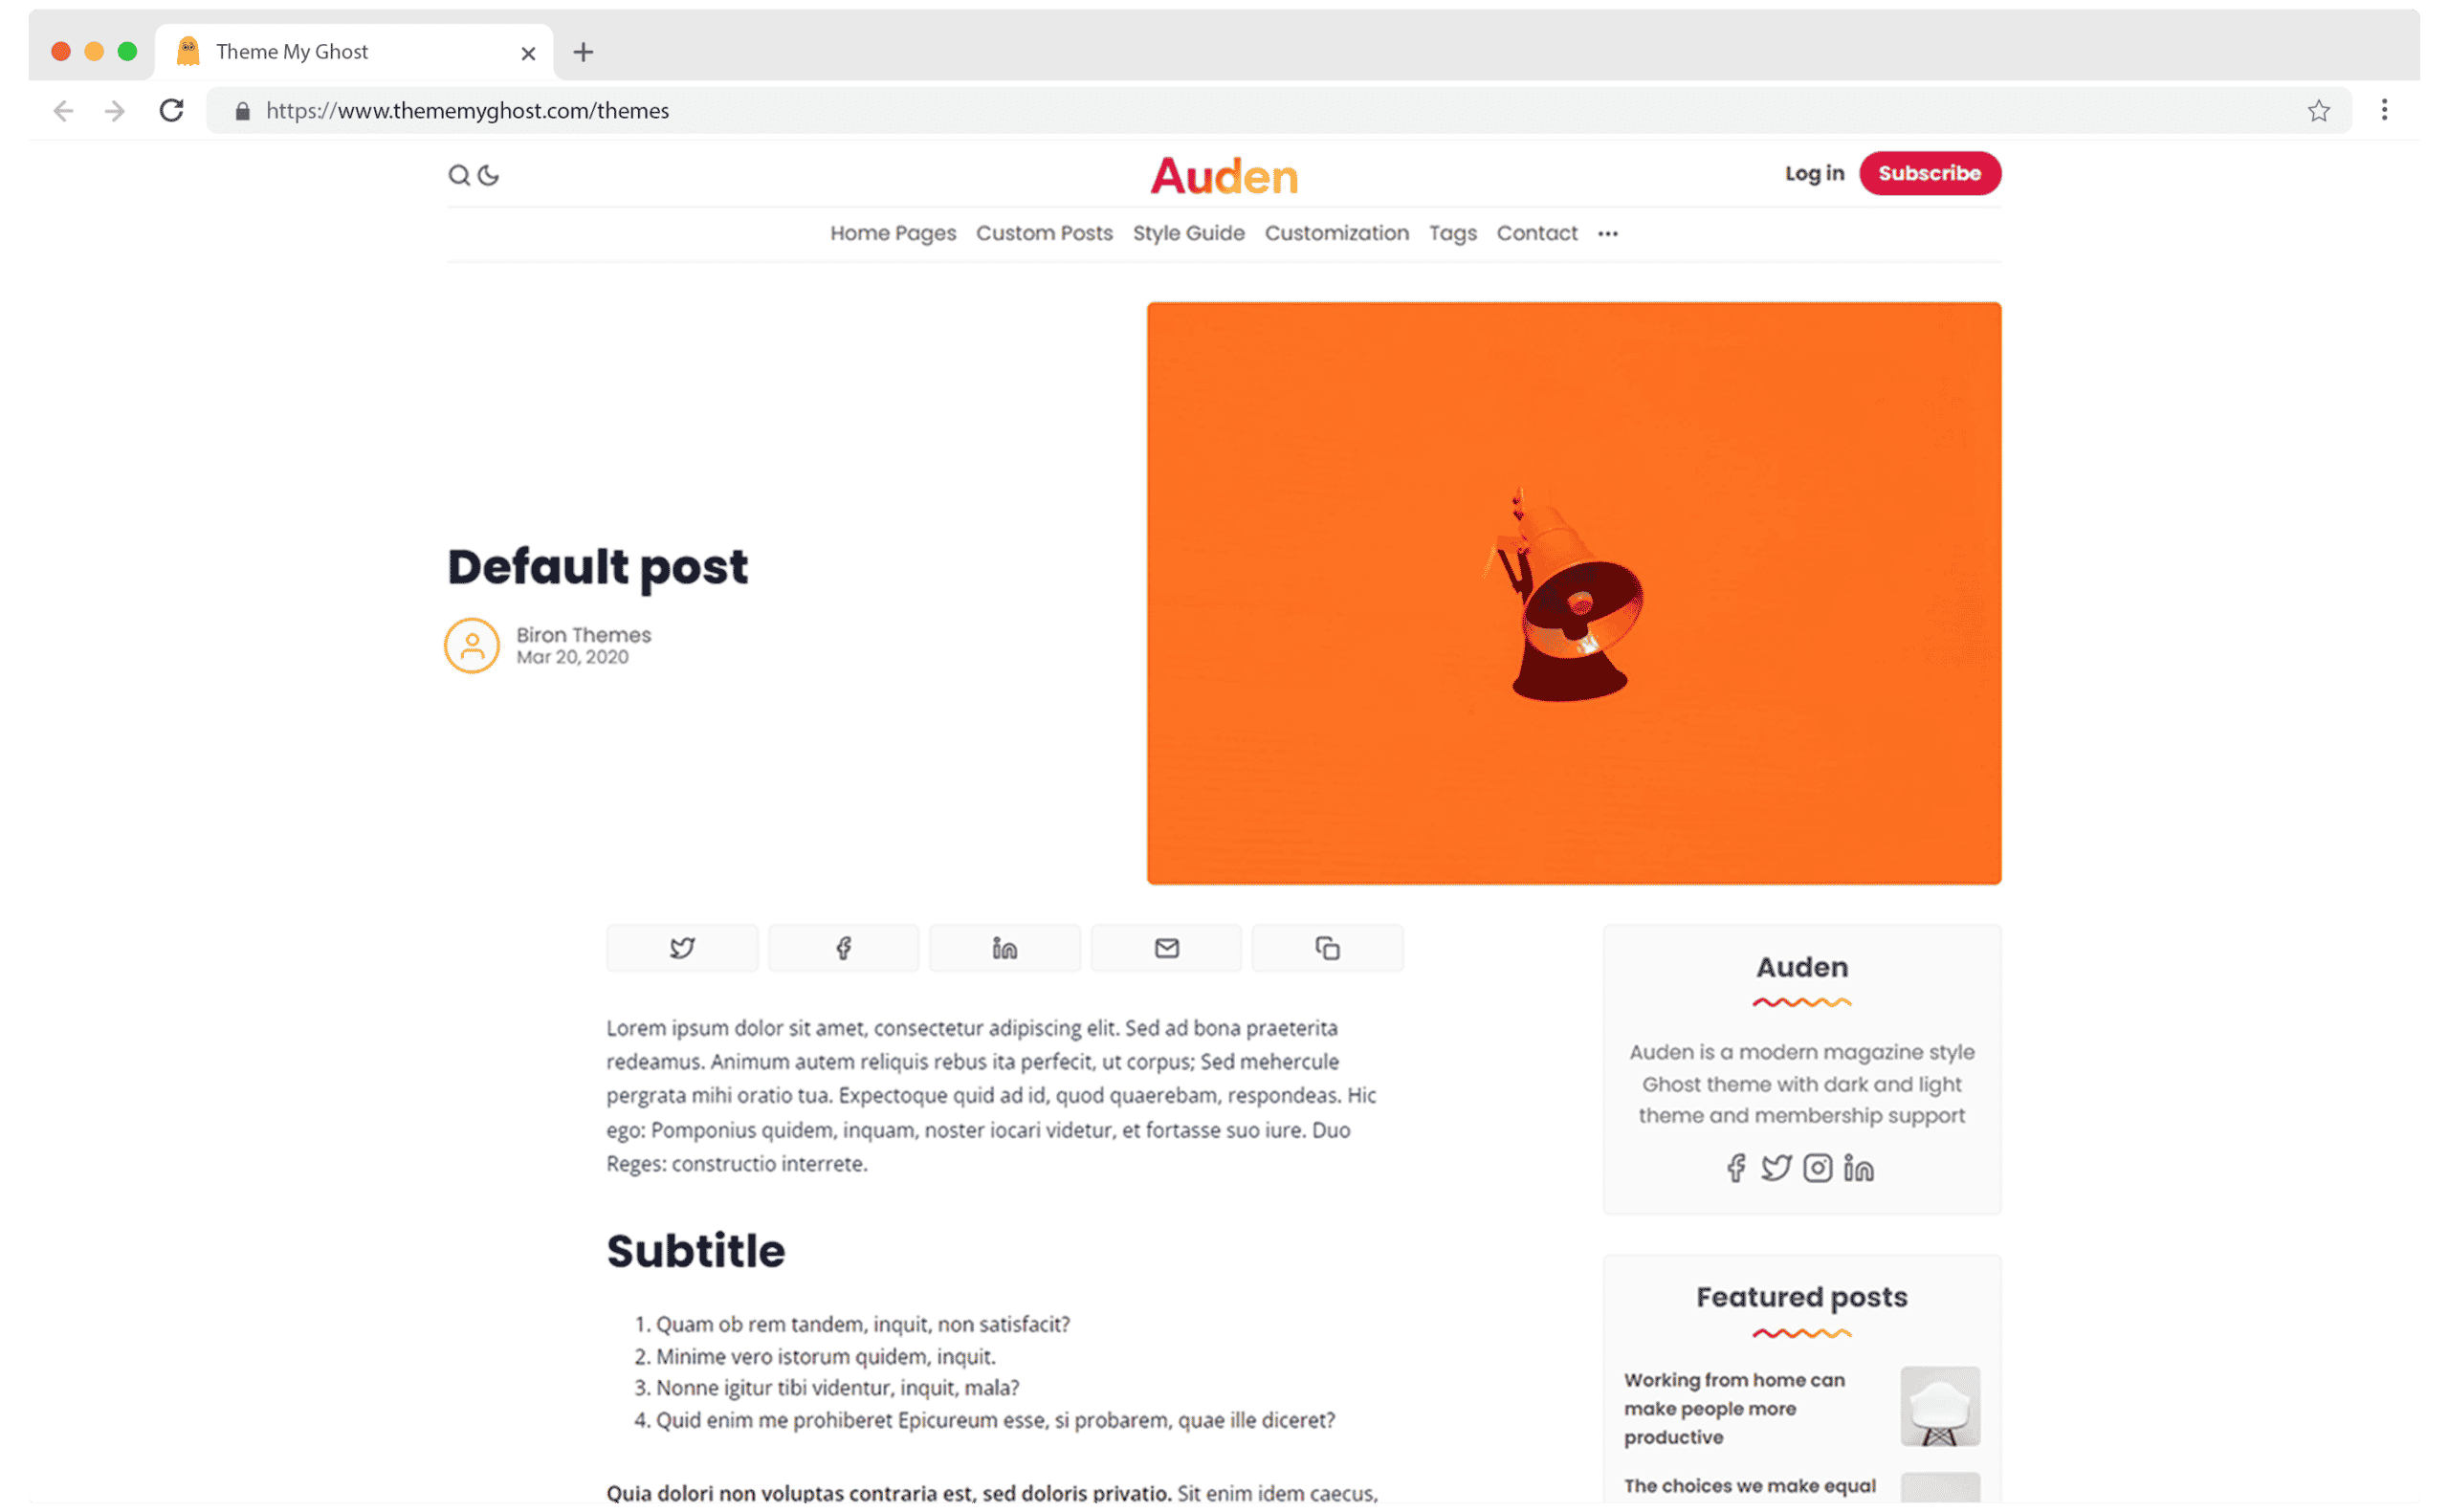 Auden Premium Ghost Theme Template with Dark Mode for Blog Membership and Newsletter by Biron Themes 6